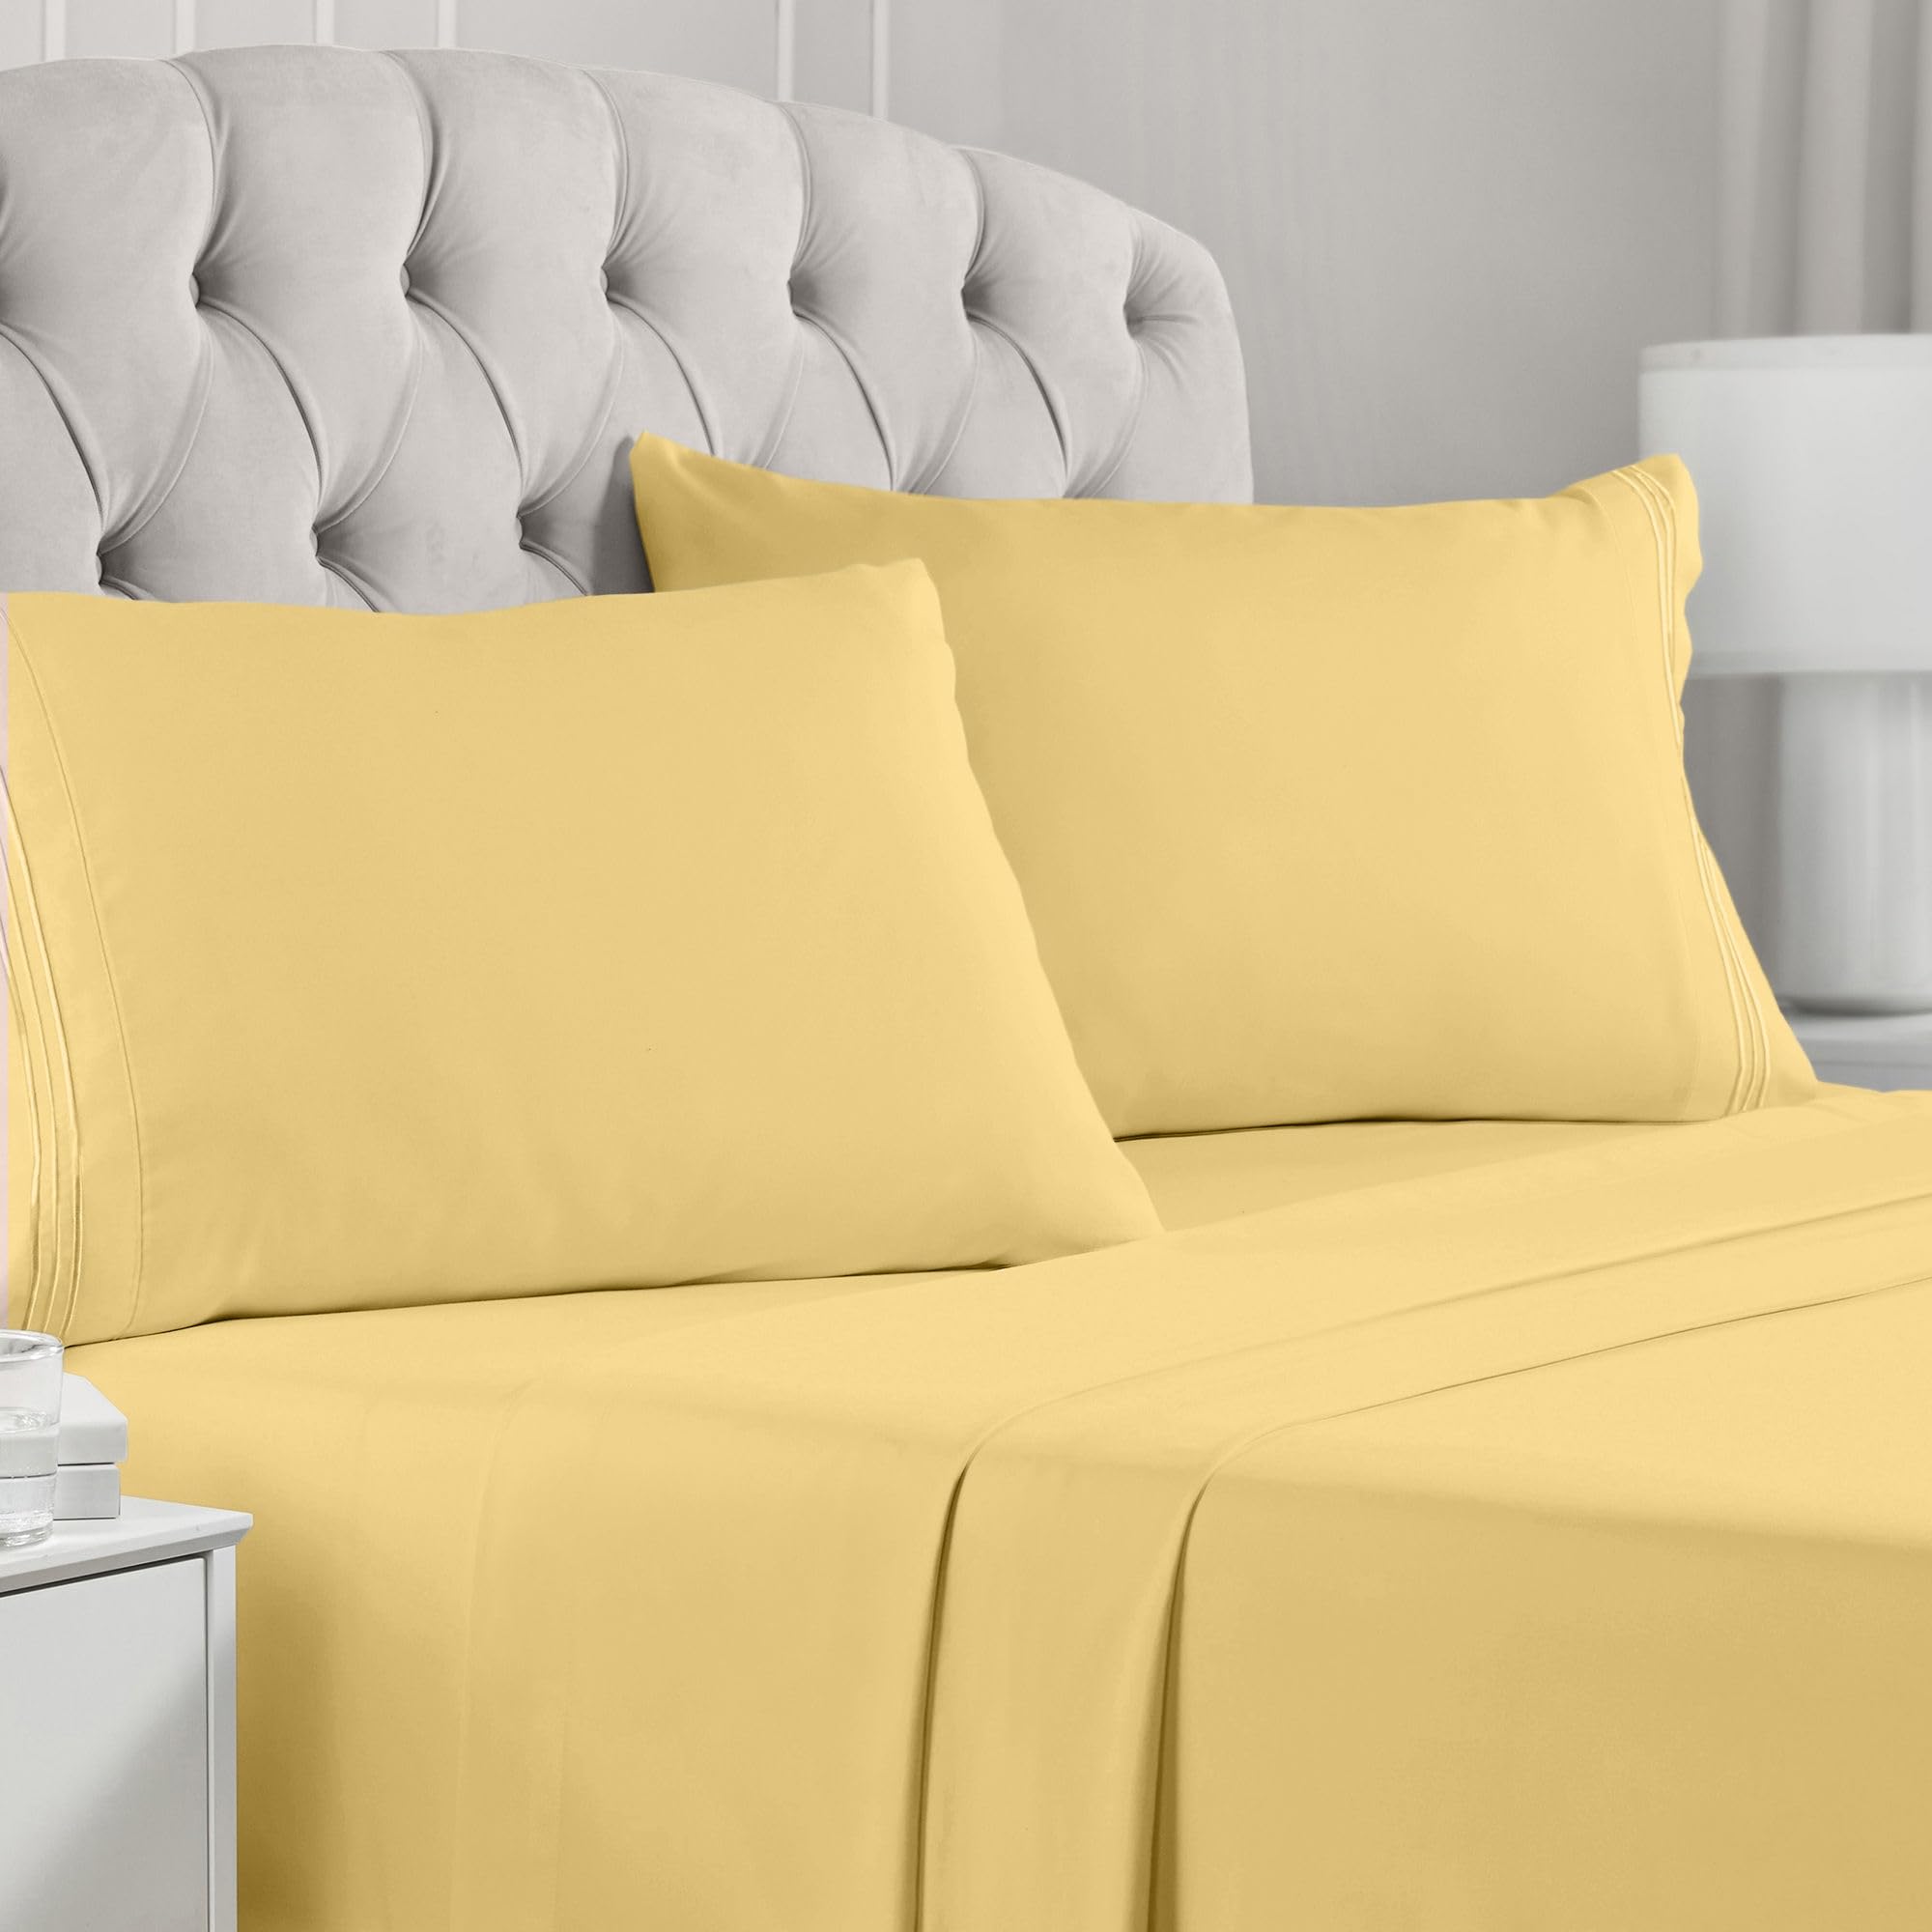 Book Cover Mellanni Yellow Sheets King Size - Hotel Luxury 1800 Bedding Sheets & Pillowcases - Extra Soft Cooling Bed Sheets - Deep Pocket up to 16 inch - Wrinkle, Fade, Stain Resistant - 4 Piece (King, Yellow)